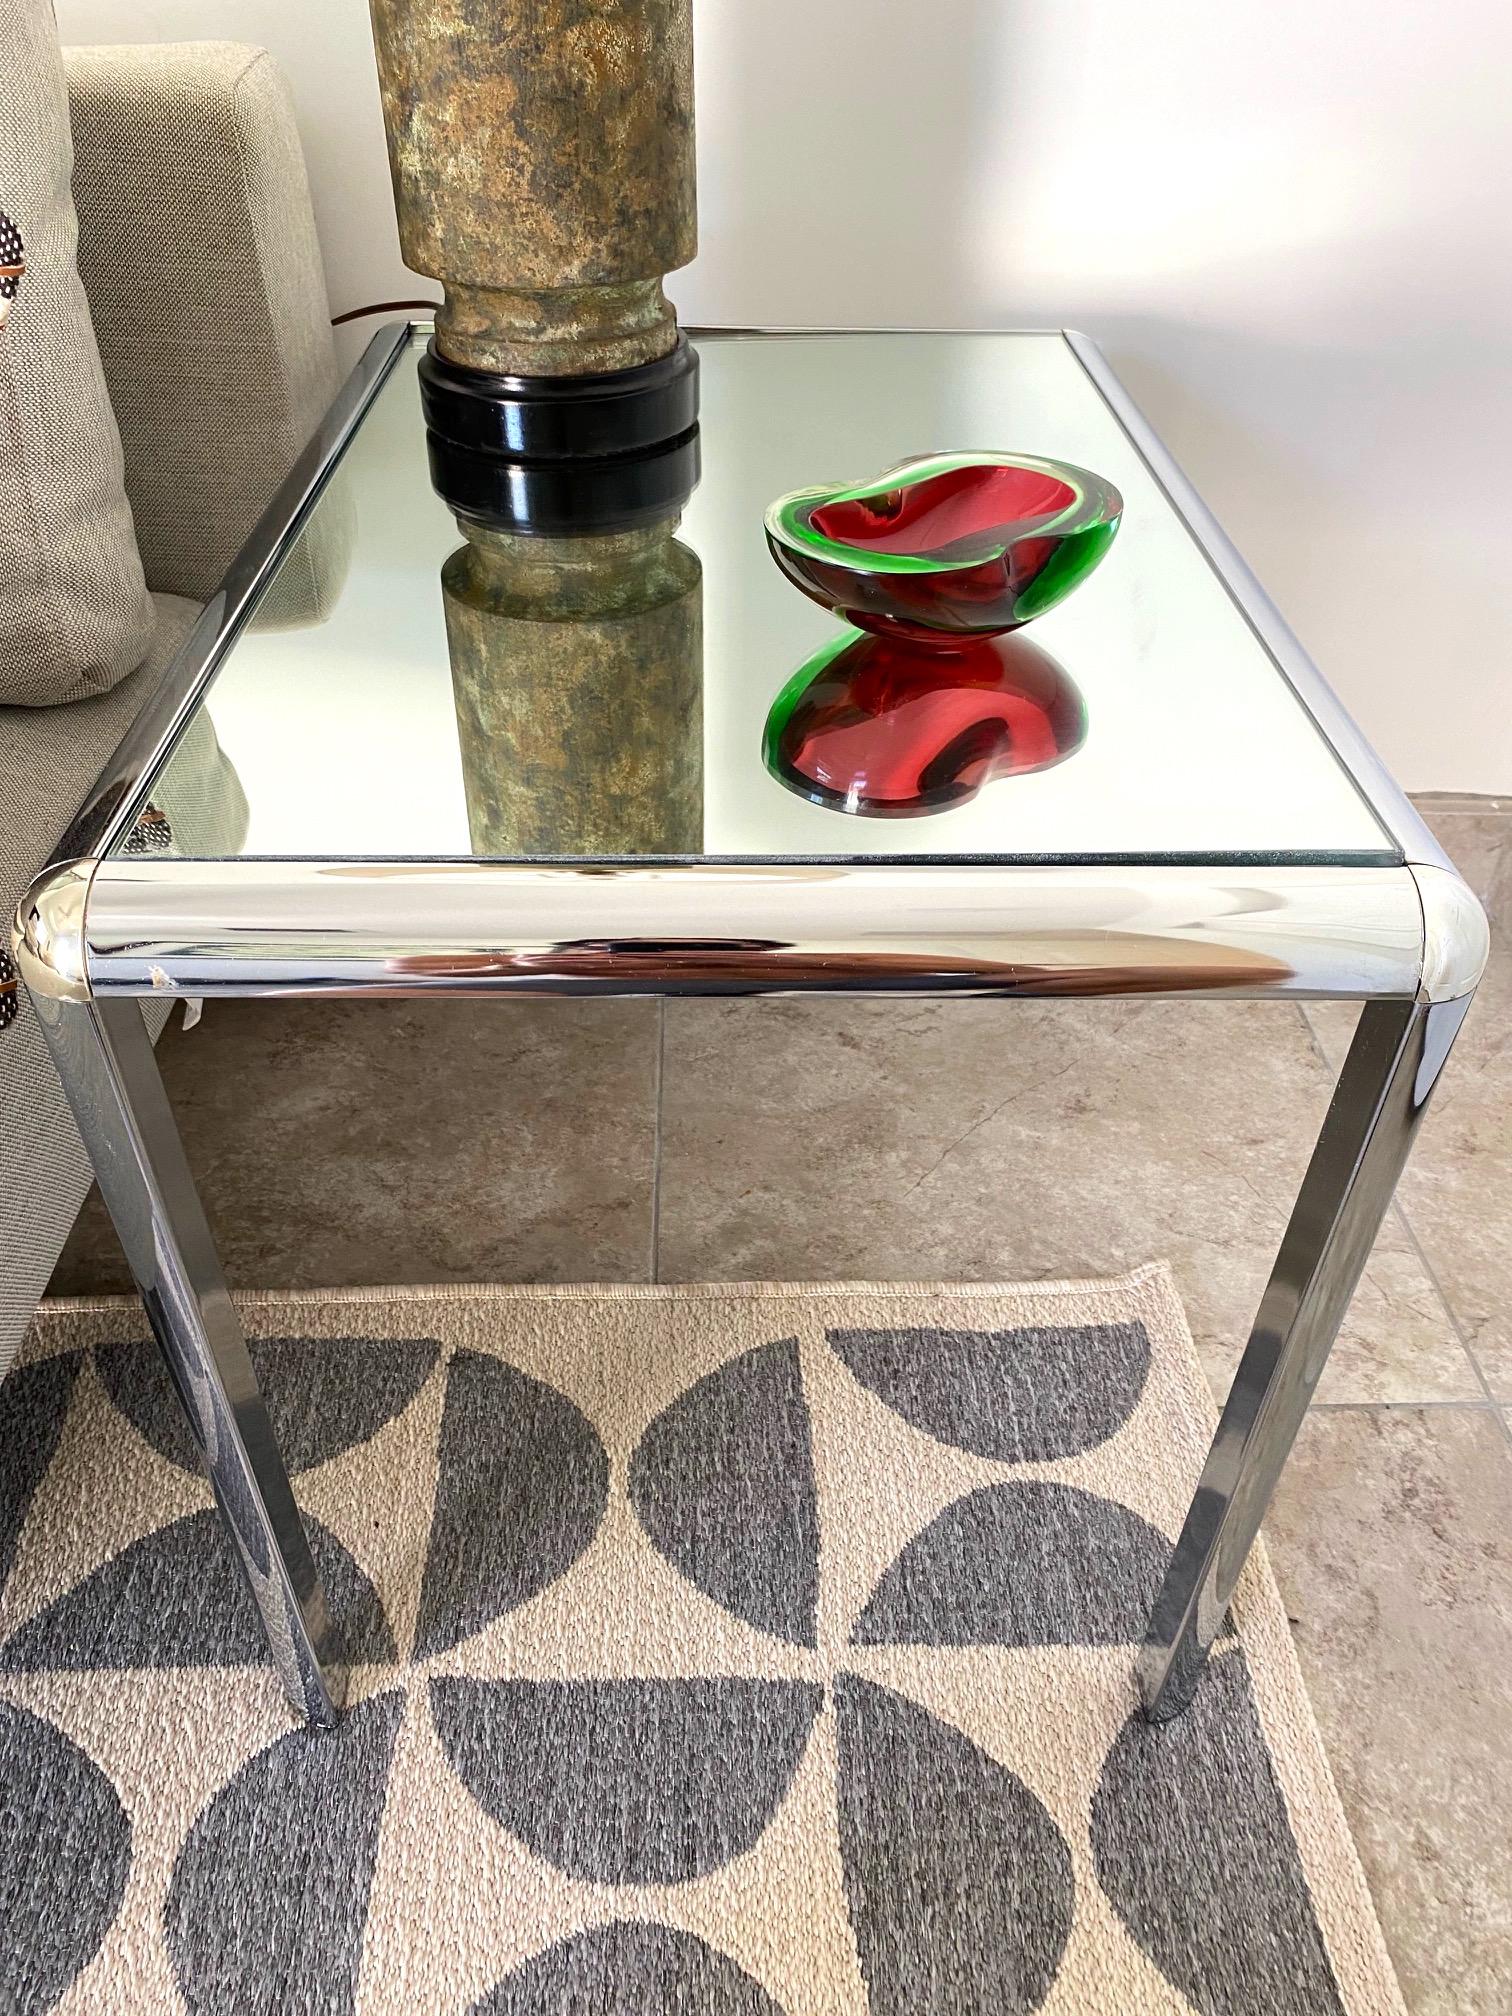 Late 20th Century Pair of Mid-Century Modern Chrome Side Tables with Mirrored Tops, c. 1970's For Sale